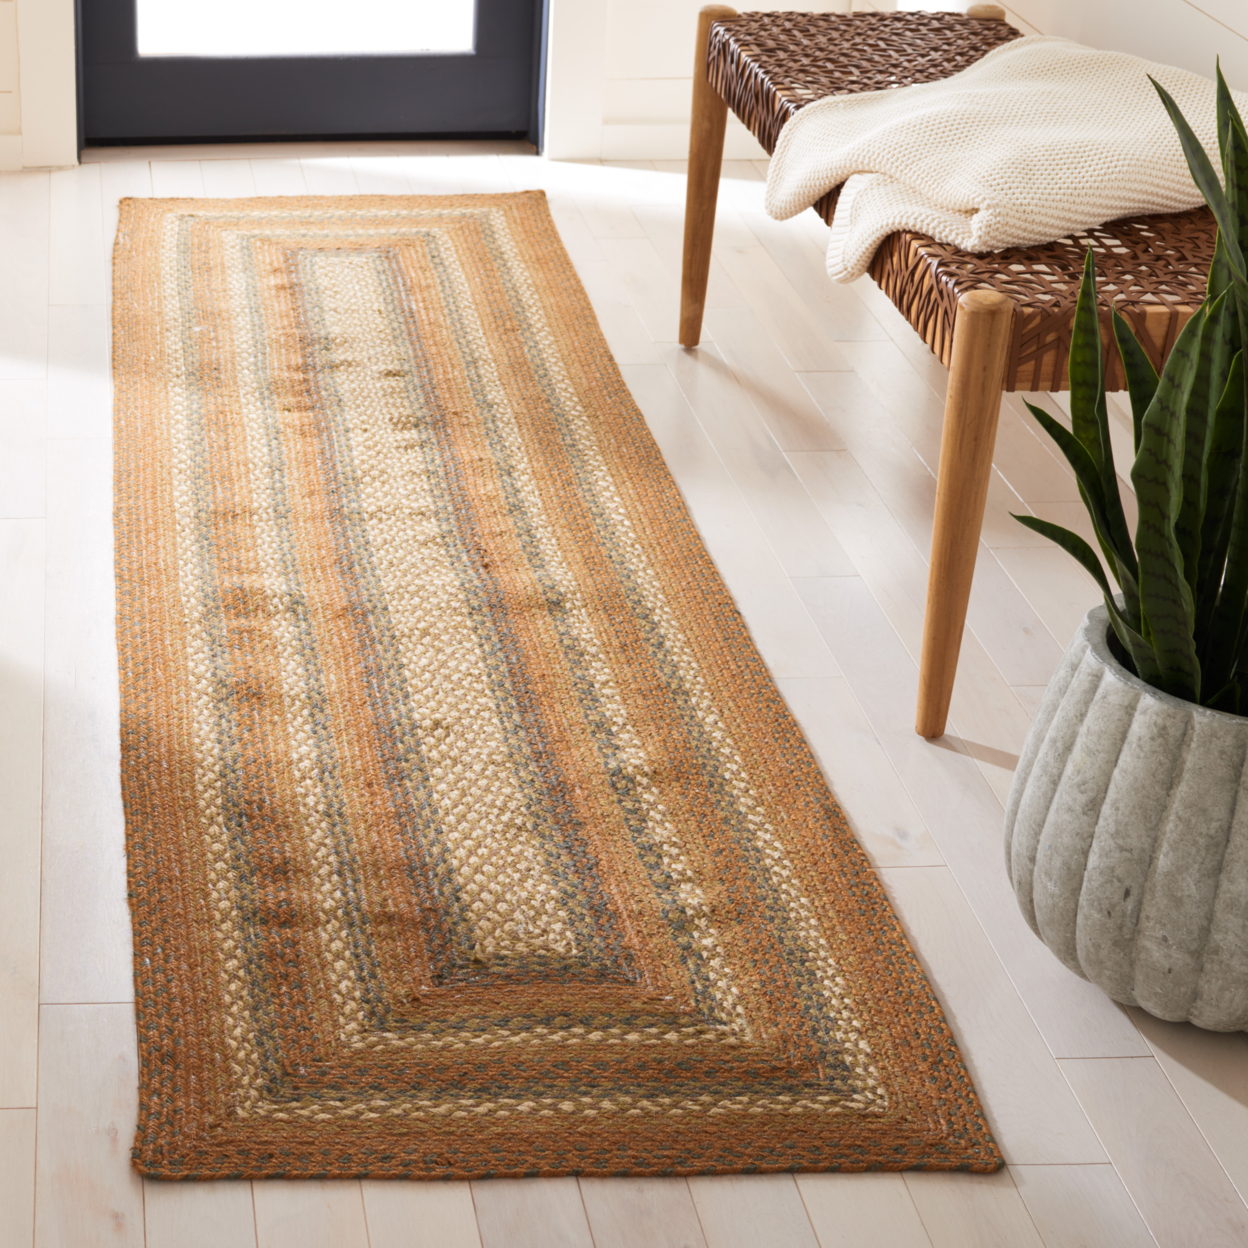 SAFAVIEH Braided BRD652A Handwoven Ivory / Green Rug - 6' Square